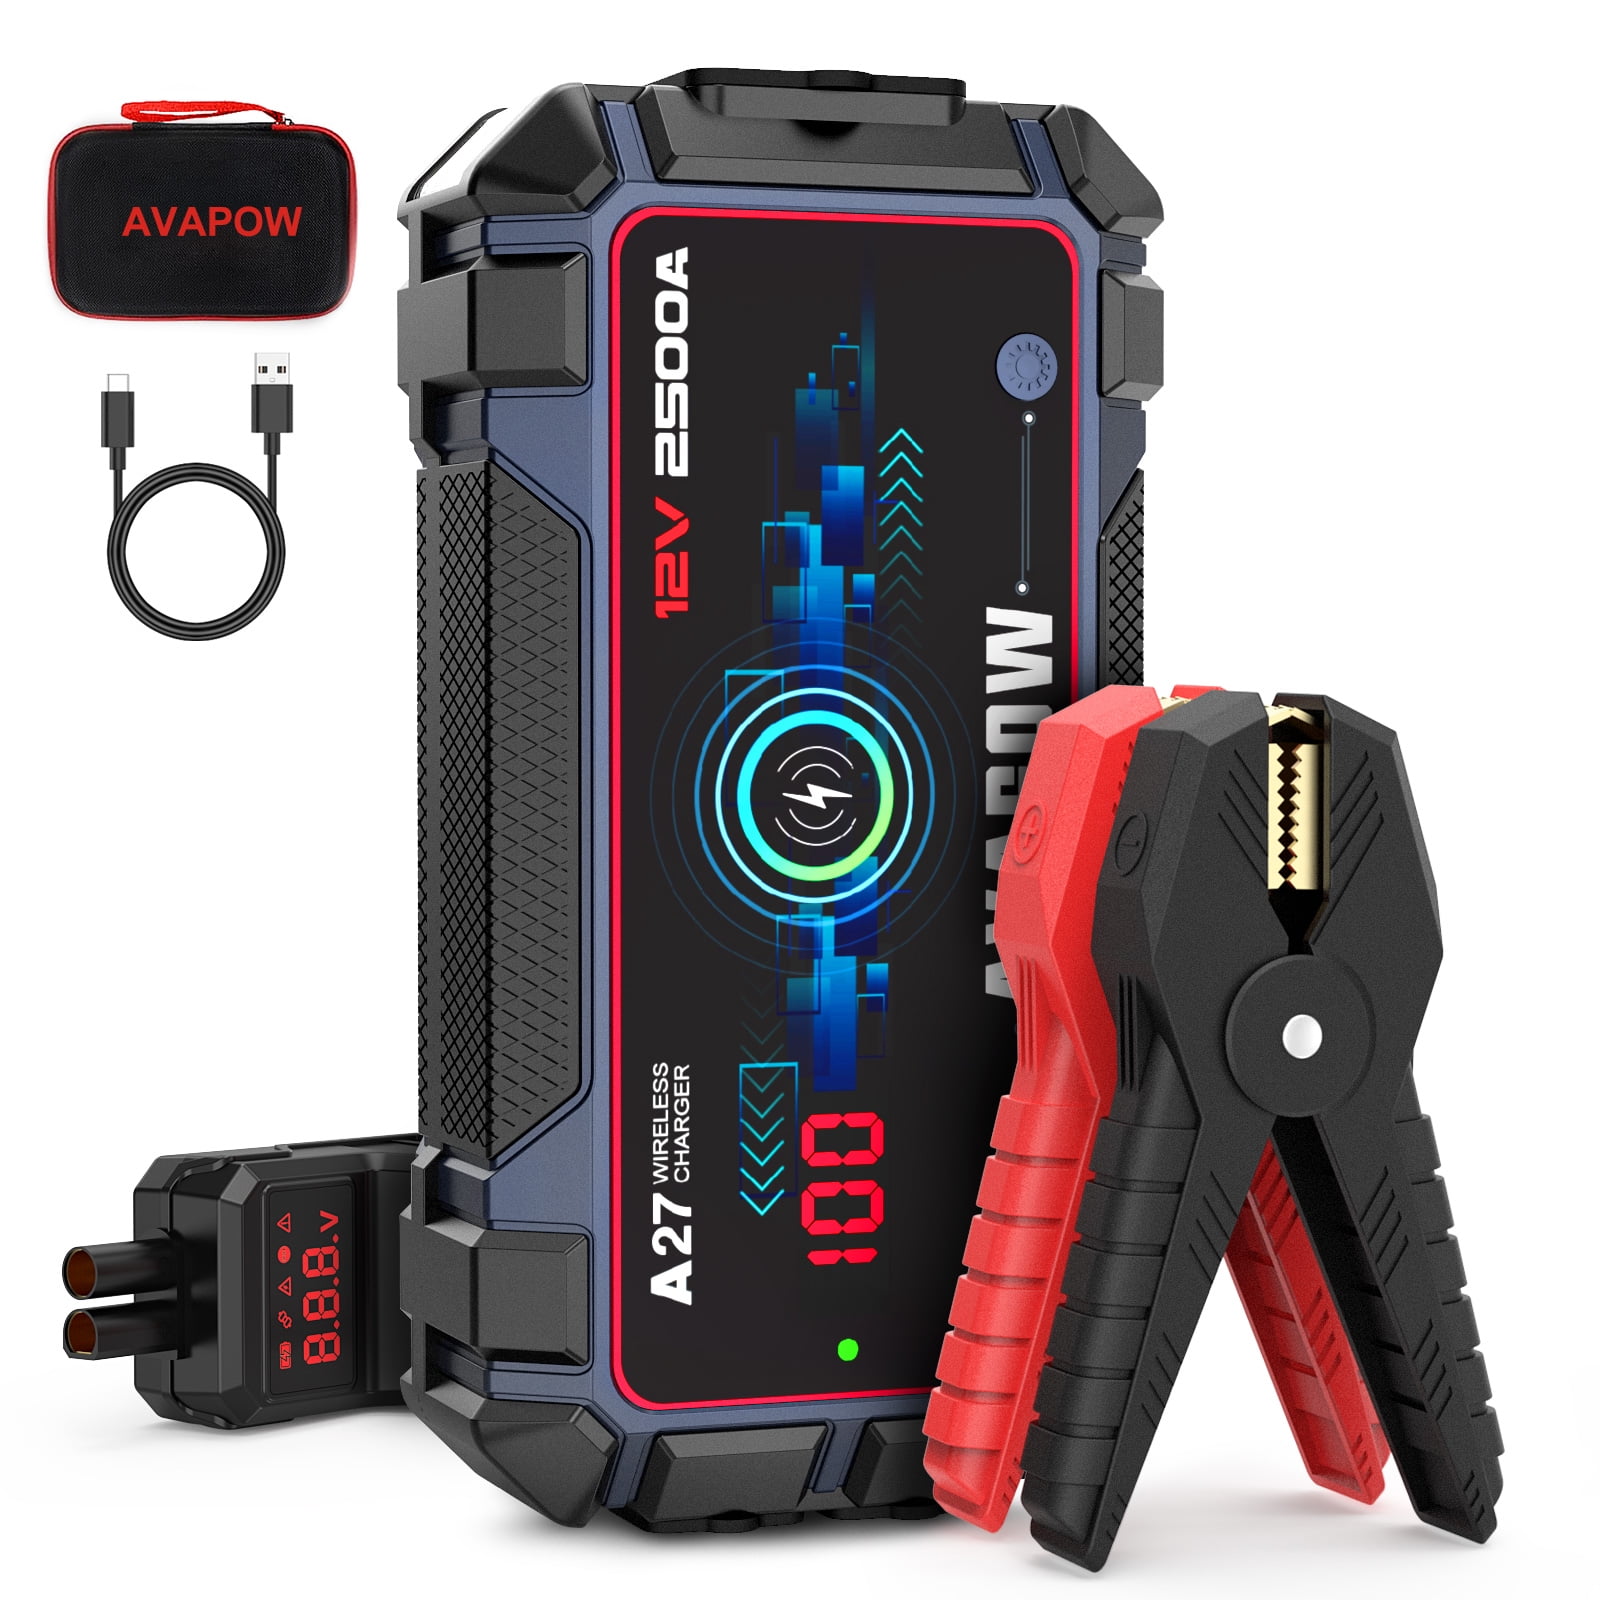 Up to 8L Gas 8L Diesel Engine with Smart Safety Cable, Wireless Charging and USB Fast Charging, IP65 Portable Auto Battery Boost Pack Jumper Box AVAPOW Car Battery Jump Starter 2500A Peak 22800mAh 